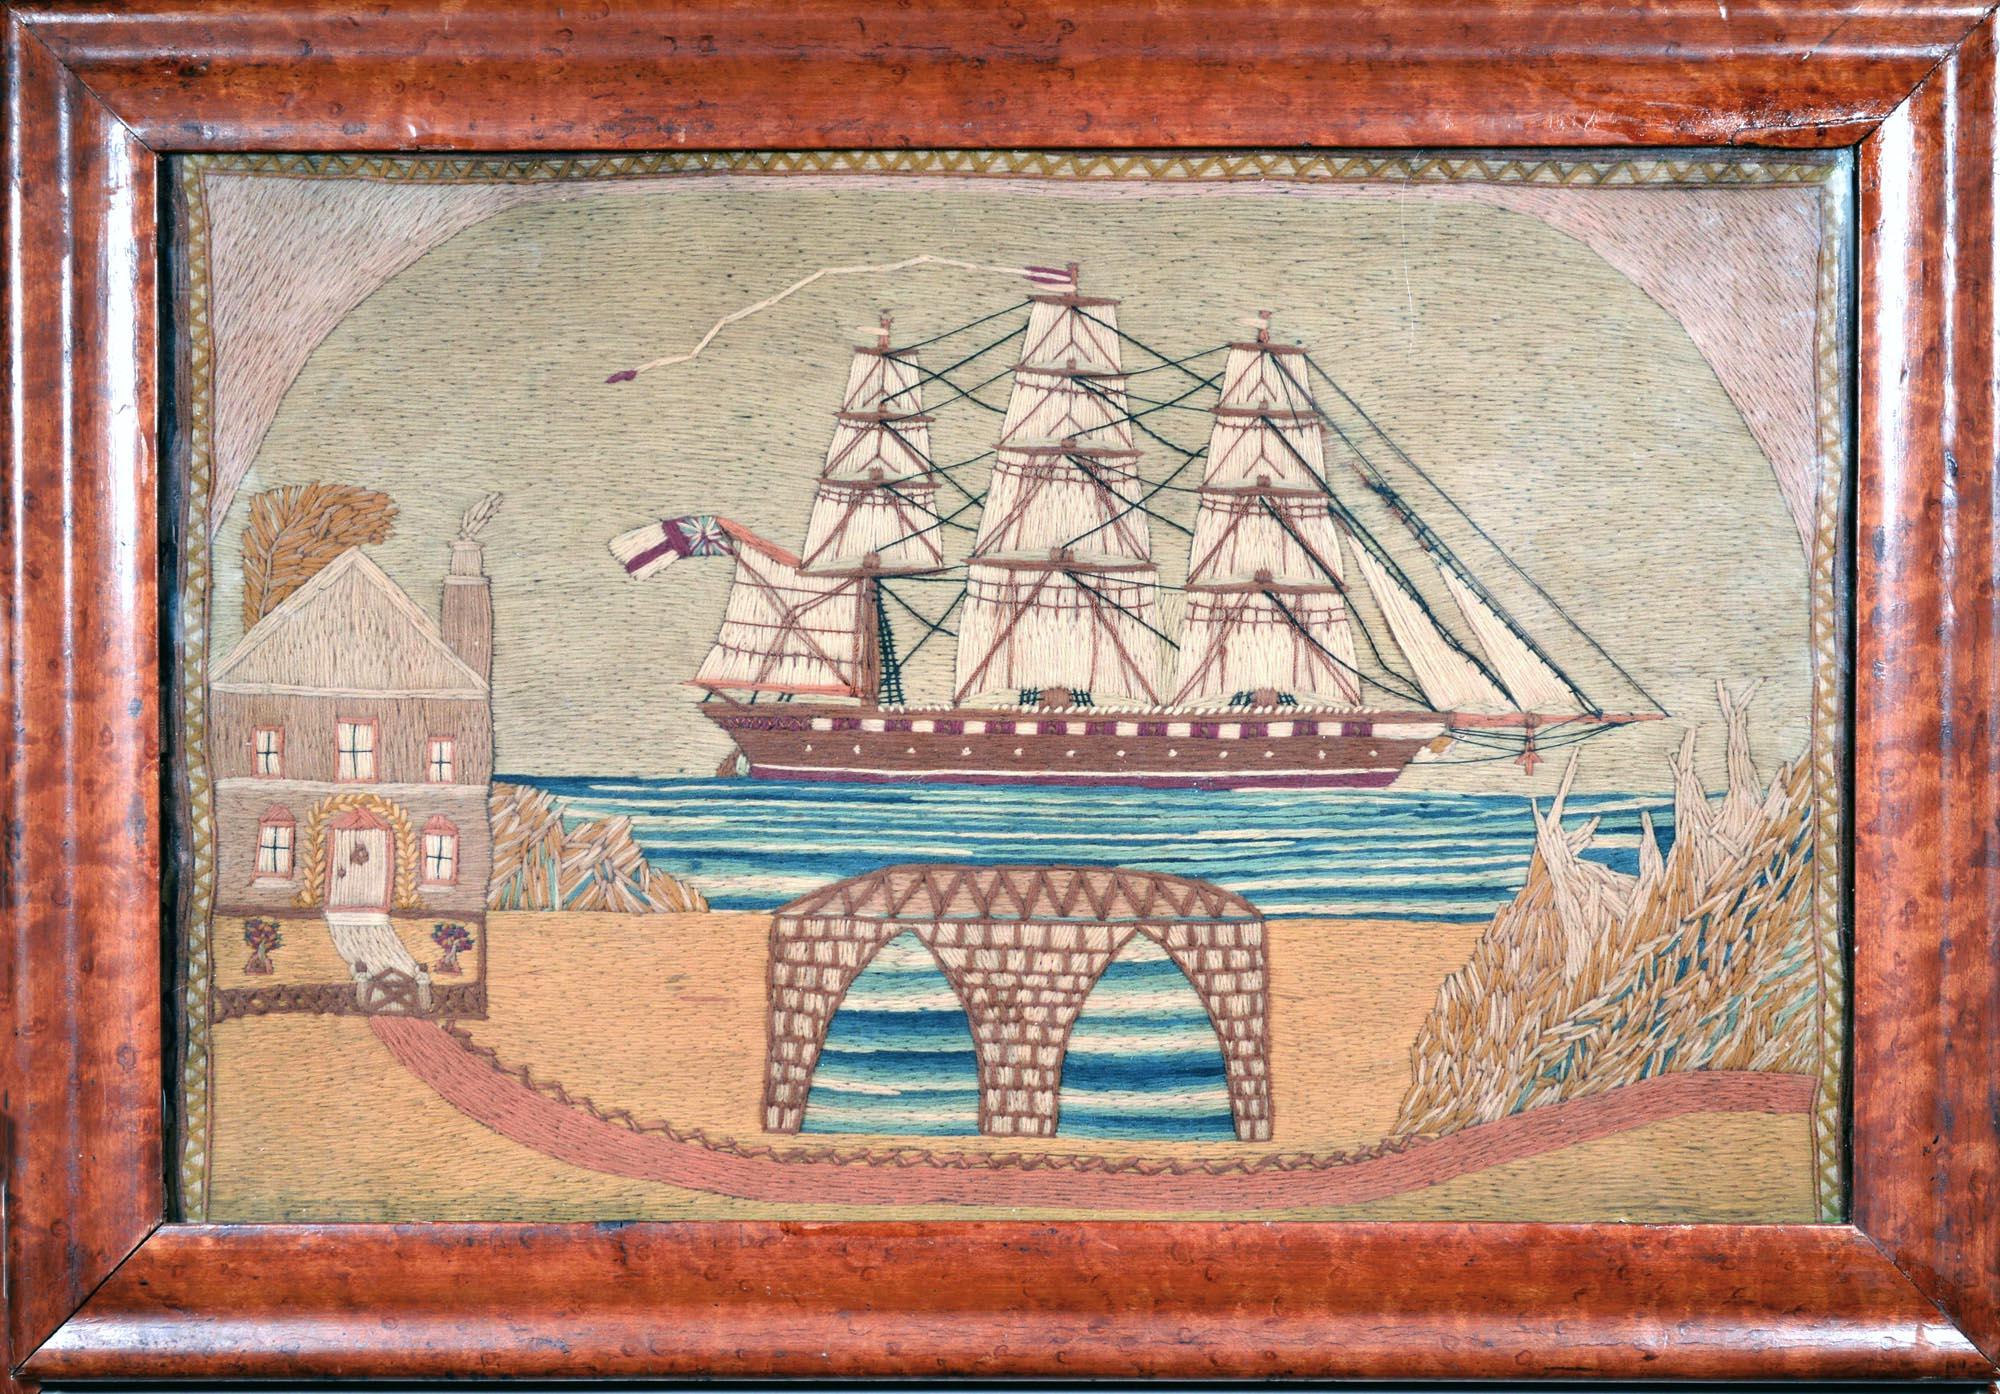 Late 19th Century British Sailor's Woolwork or Woolie with House and Bridge